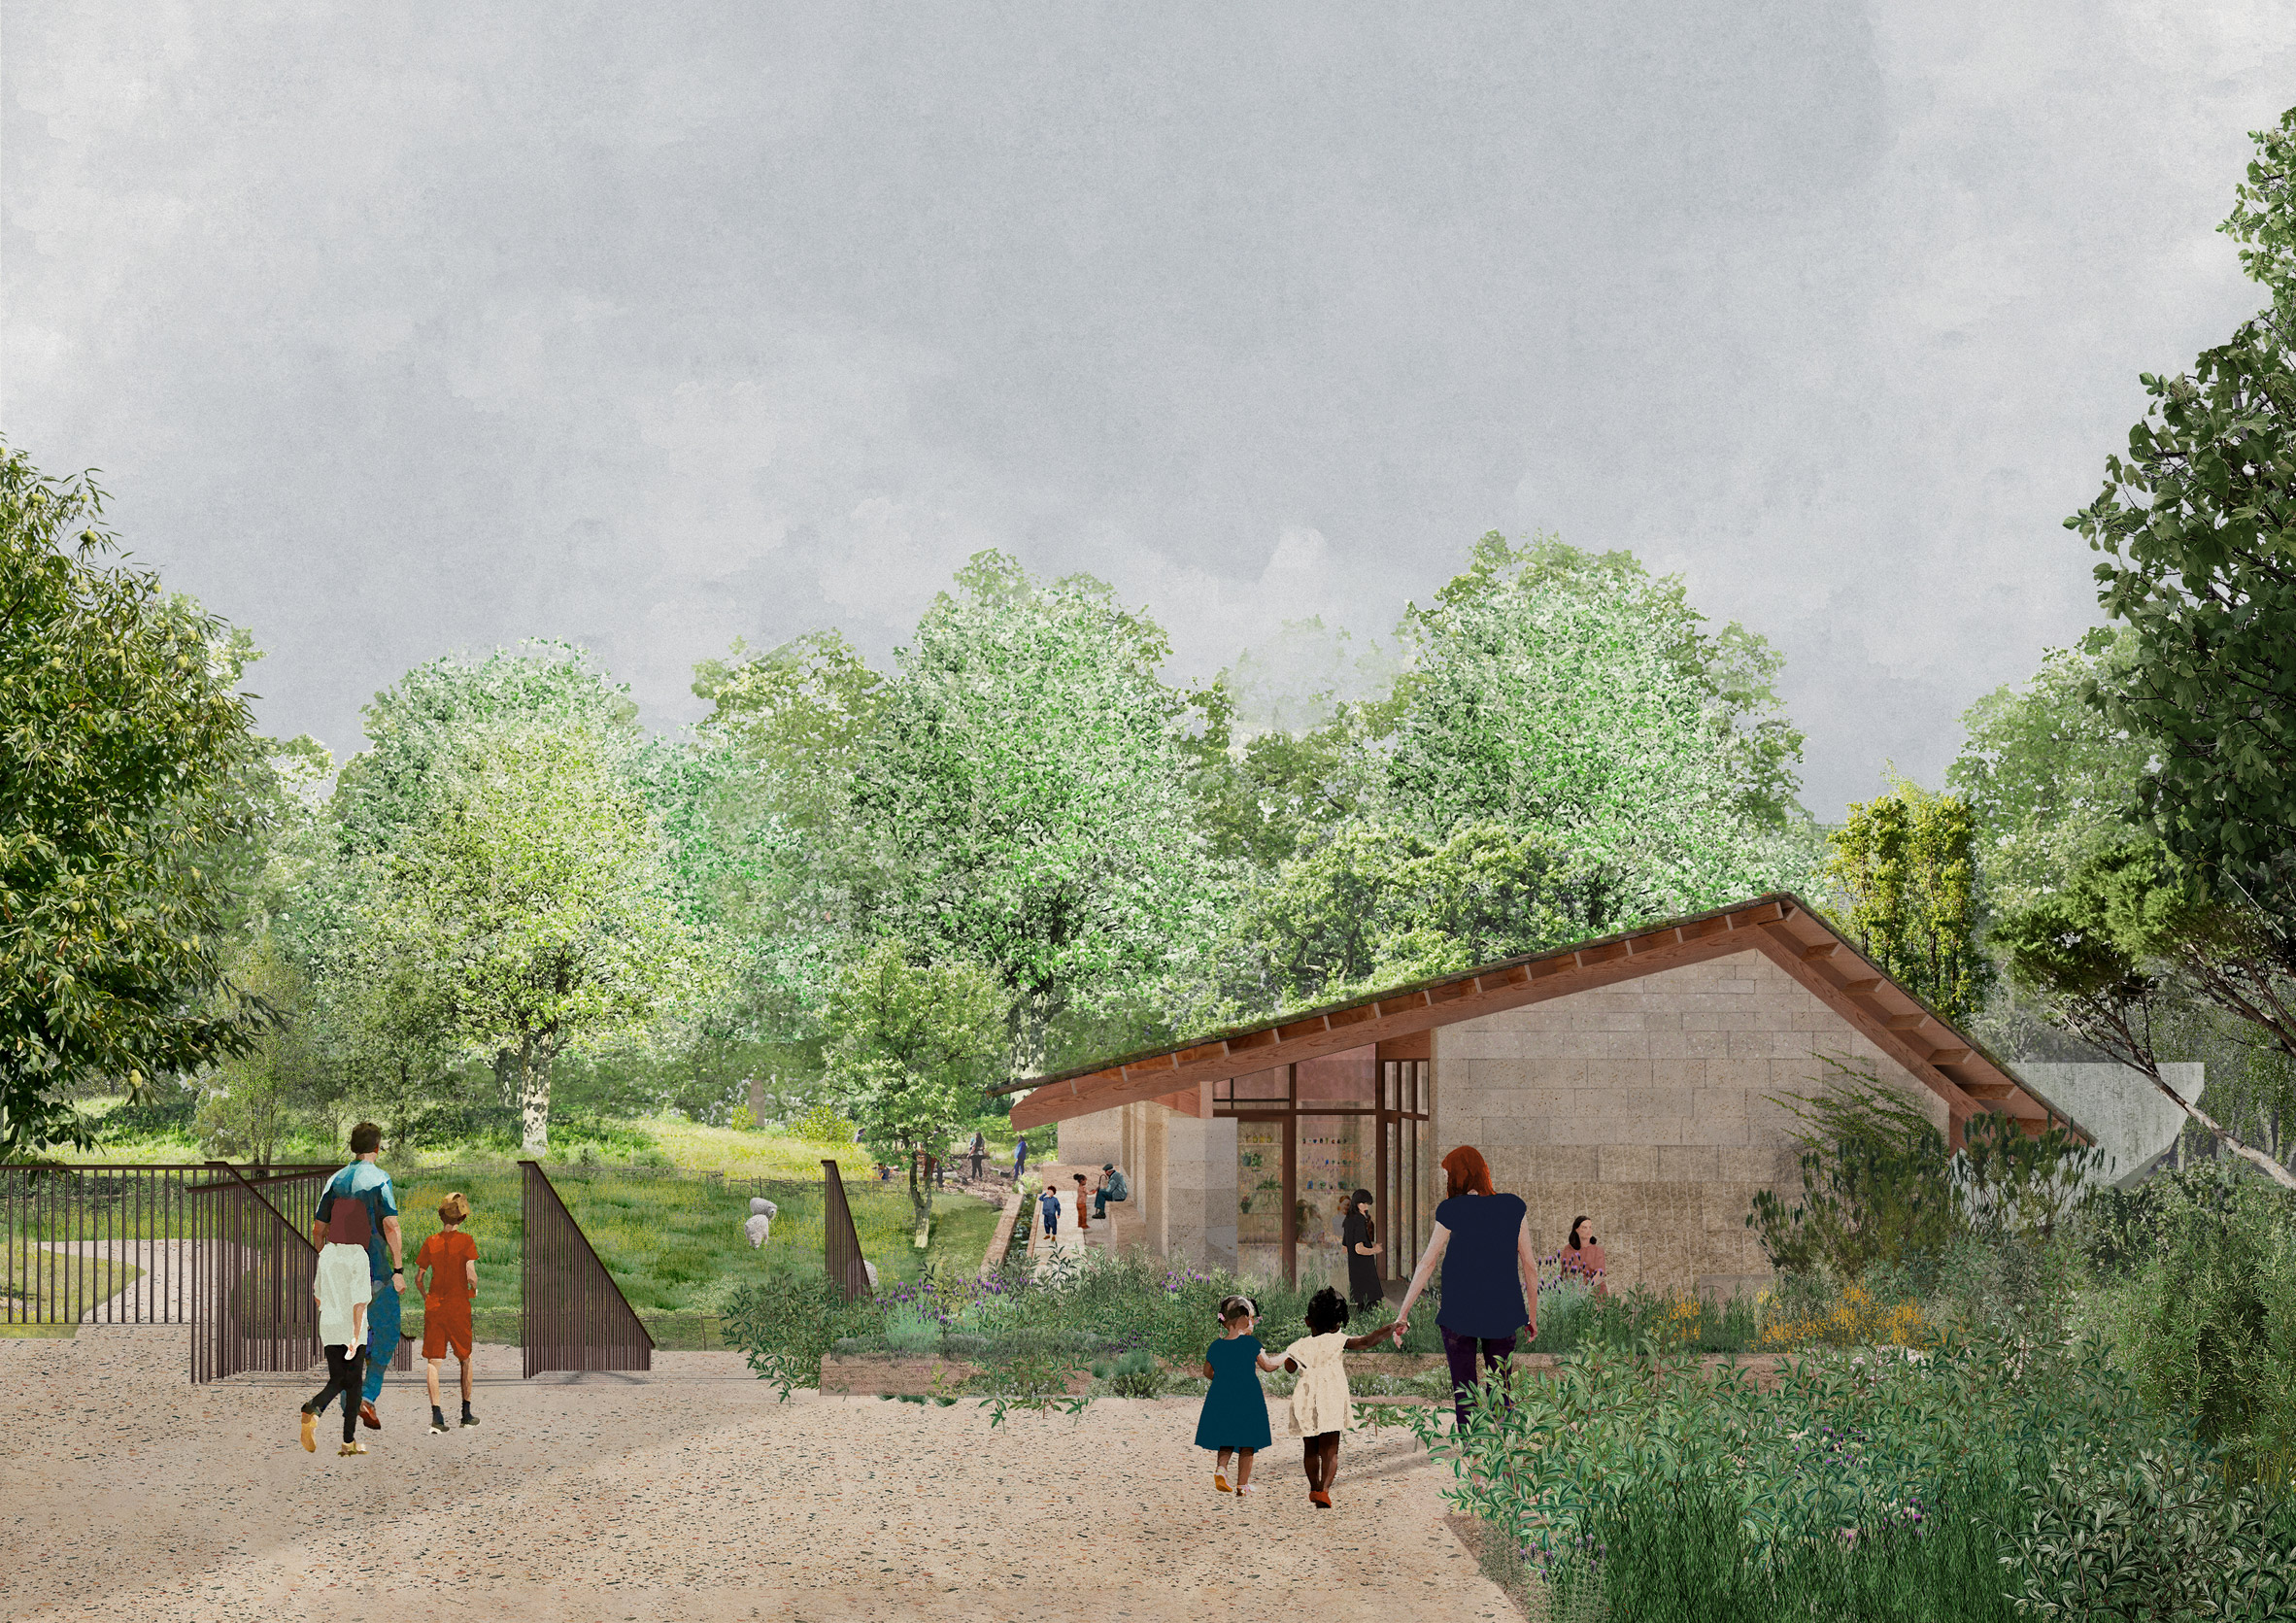 A visual of the Urban Nature Project's Learning Centre by Feilden Fowles